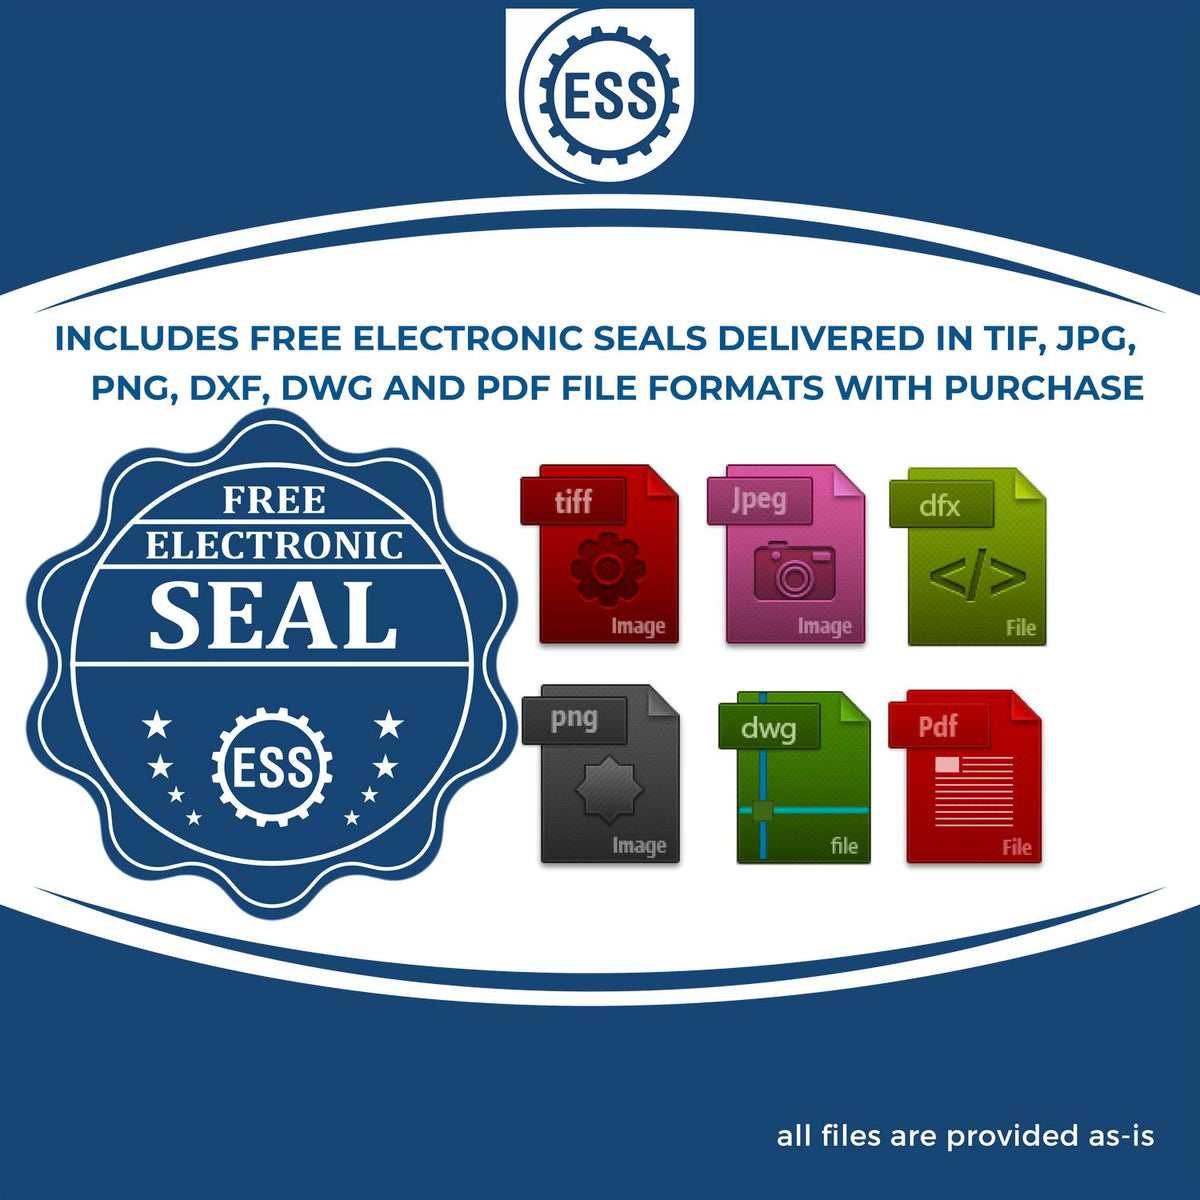 An infographic for the free electronic seal for the Heavy-Duty Michigan Rectangular Notary Stamp illustrating the different file type icons such as DXF, DWG, TIF, JPG and PNG.